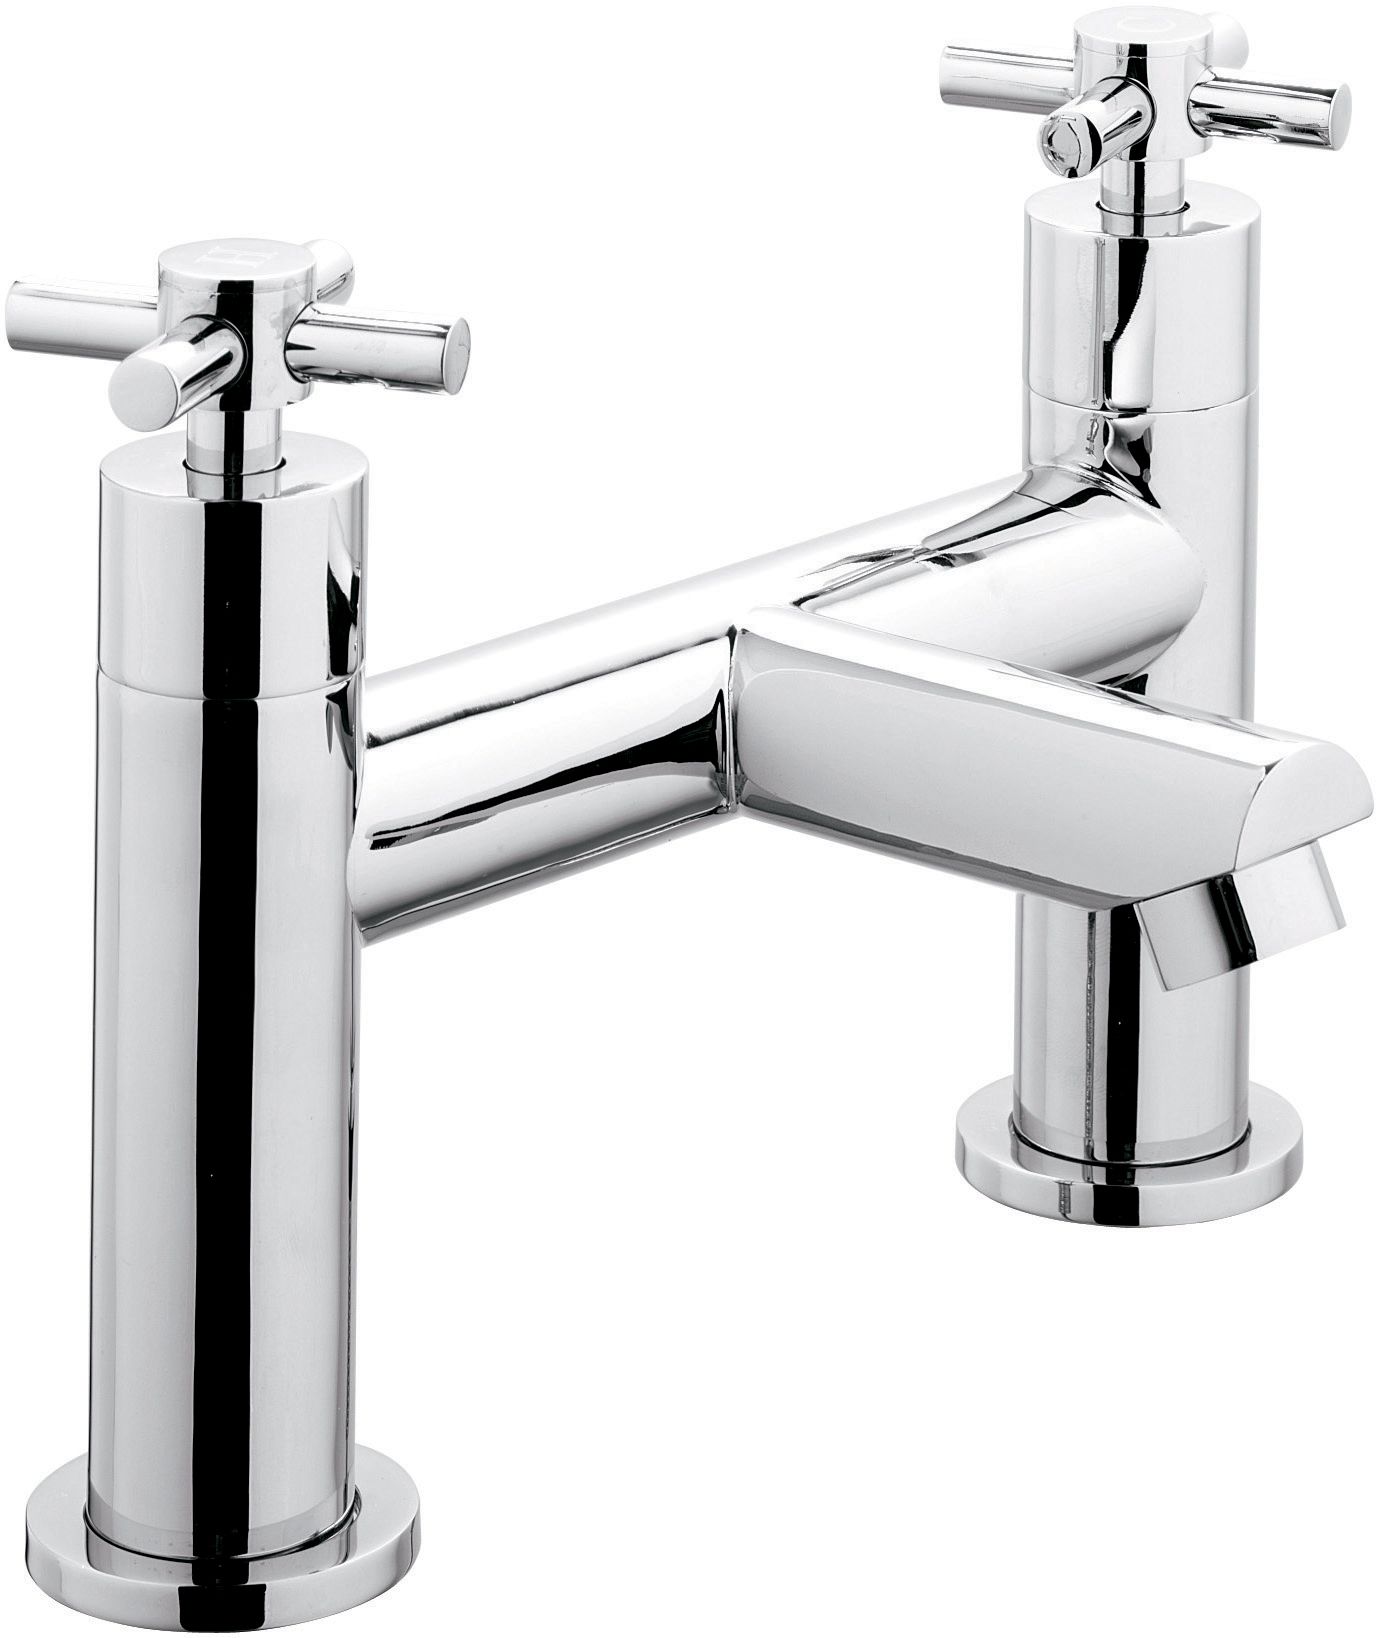 Wickes Connect Bath Filler Tap - Chrome